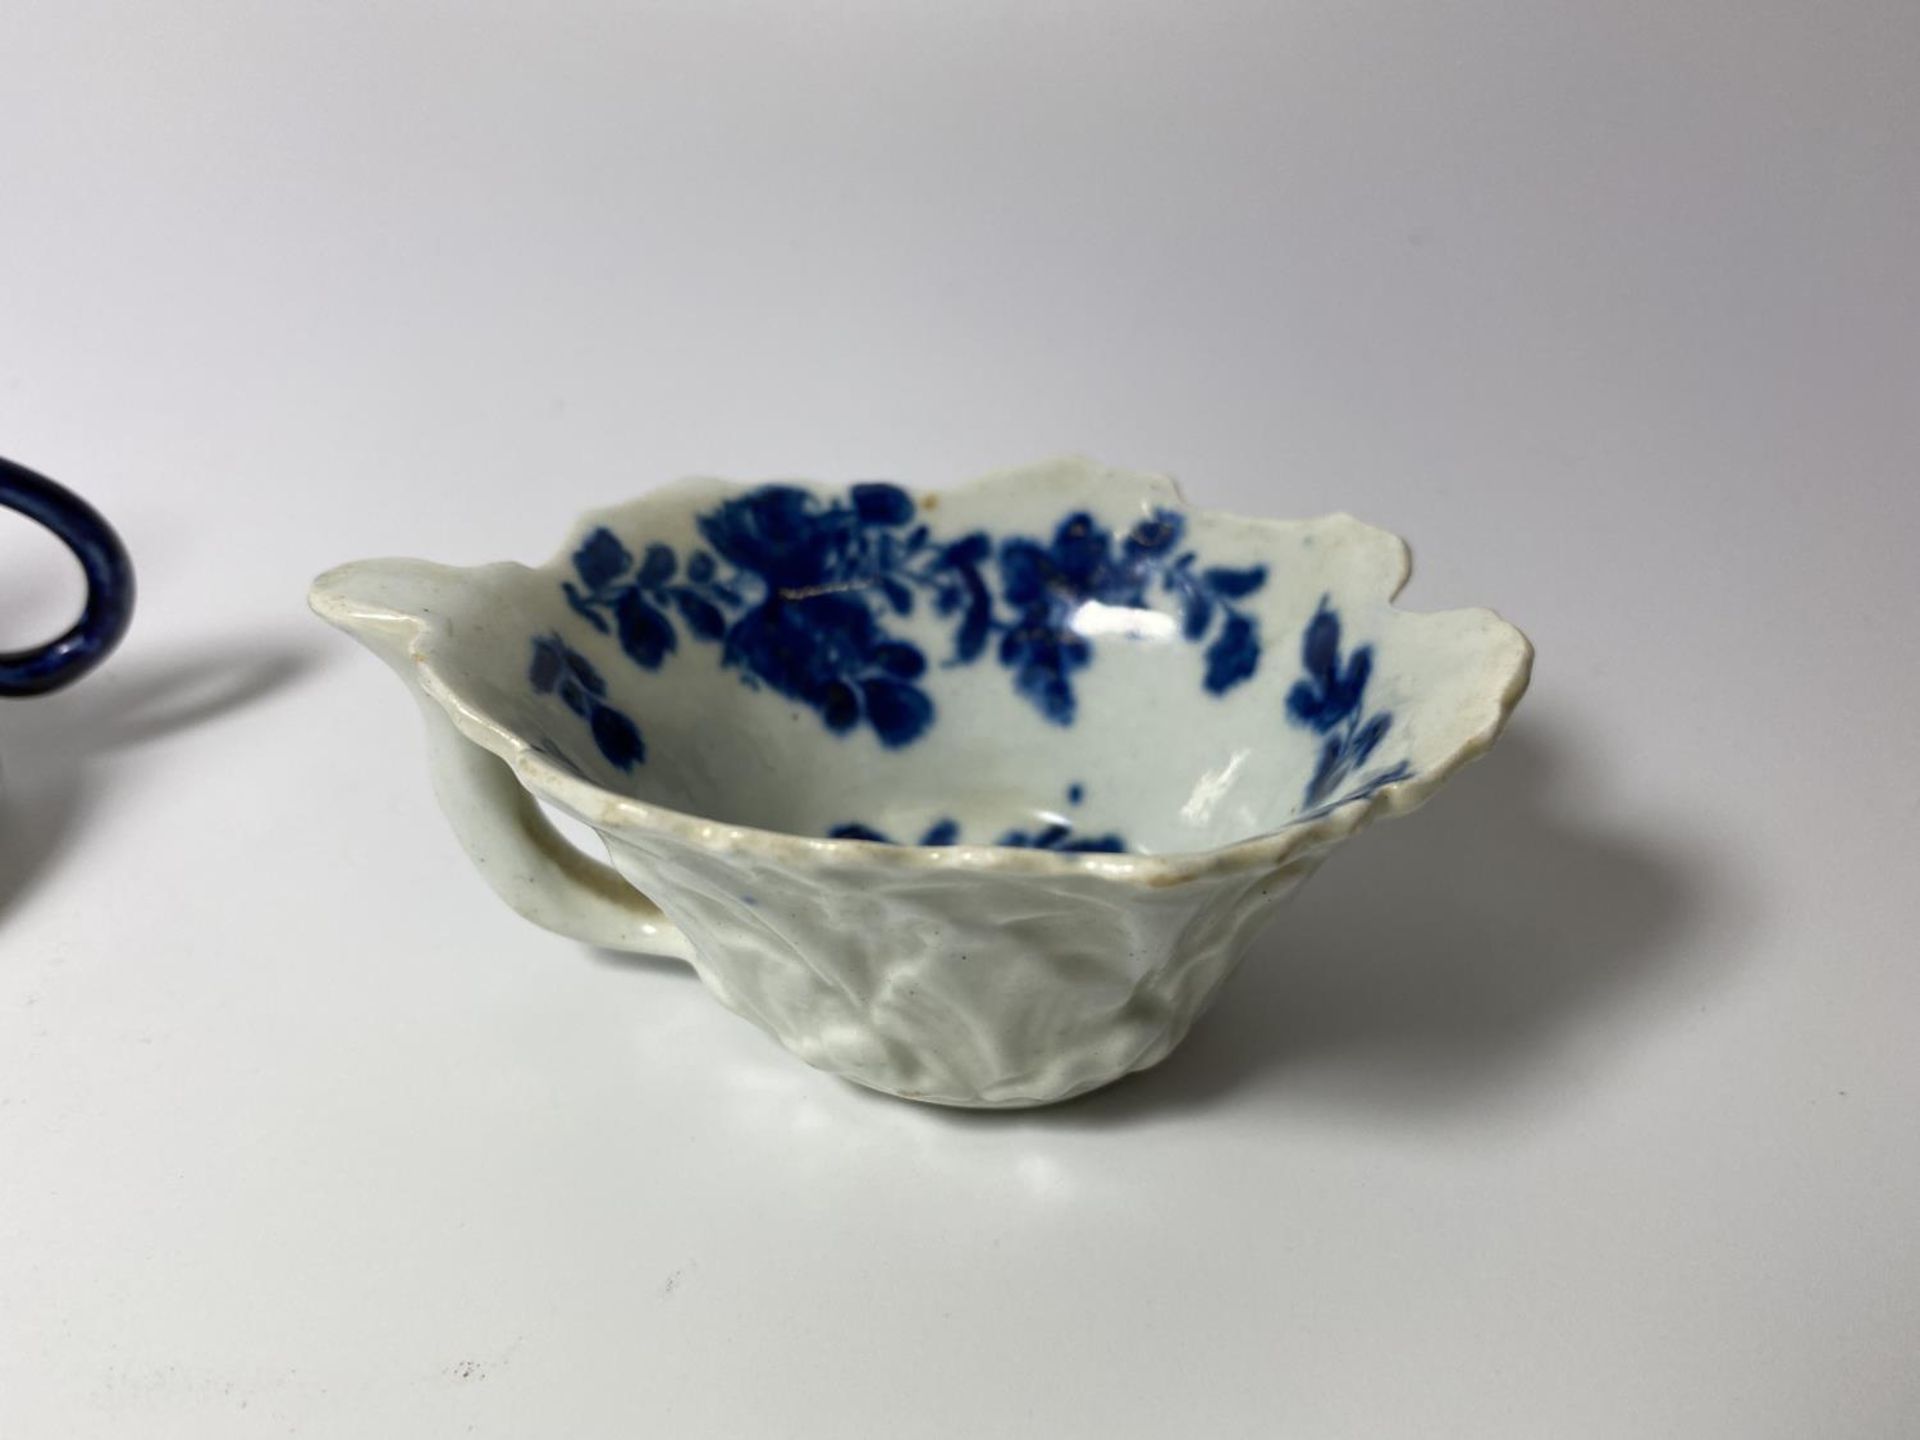 THREE 19TH CENTURY CERAMIC ITEMS - DISH WITH MEISSEN CROSS SWORDS MARK, SMALL CHELSEA STYLE - Image 3 of 3